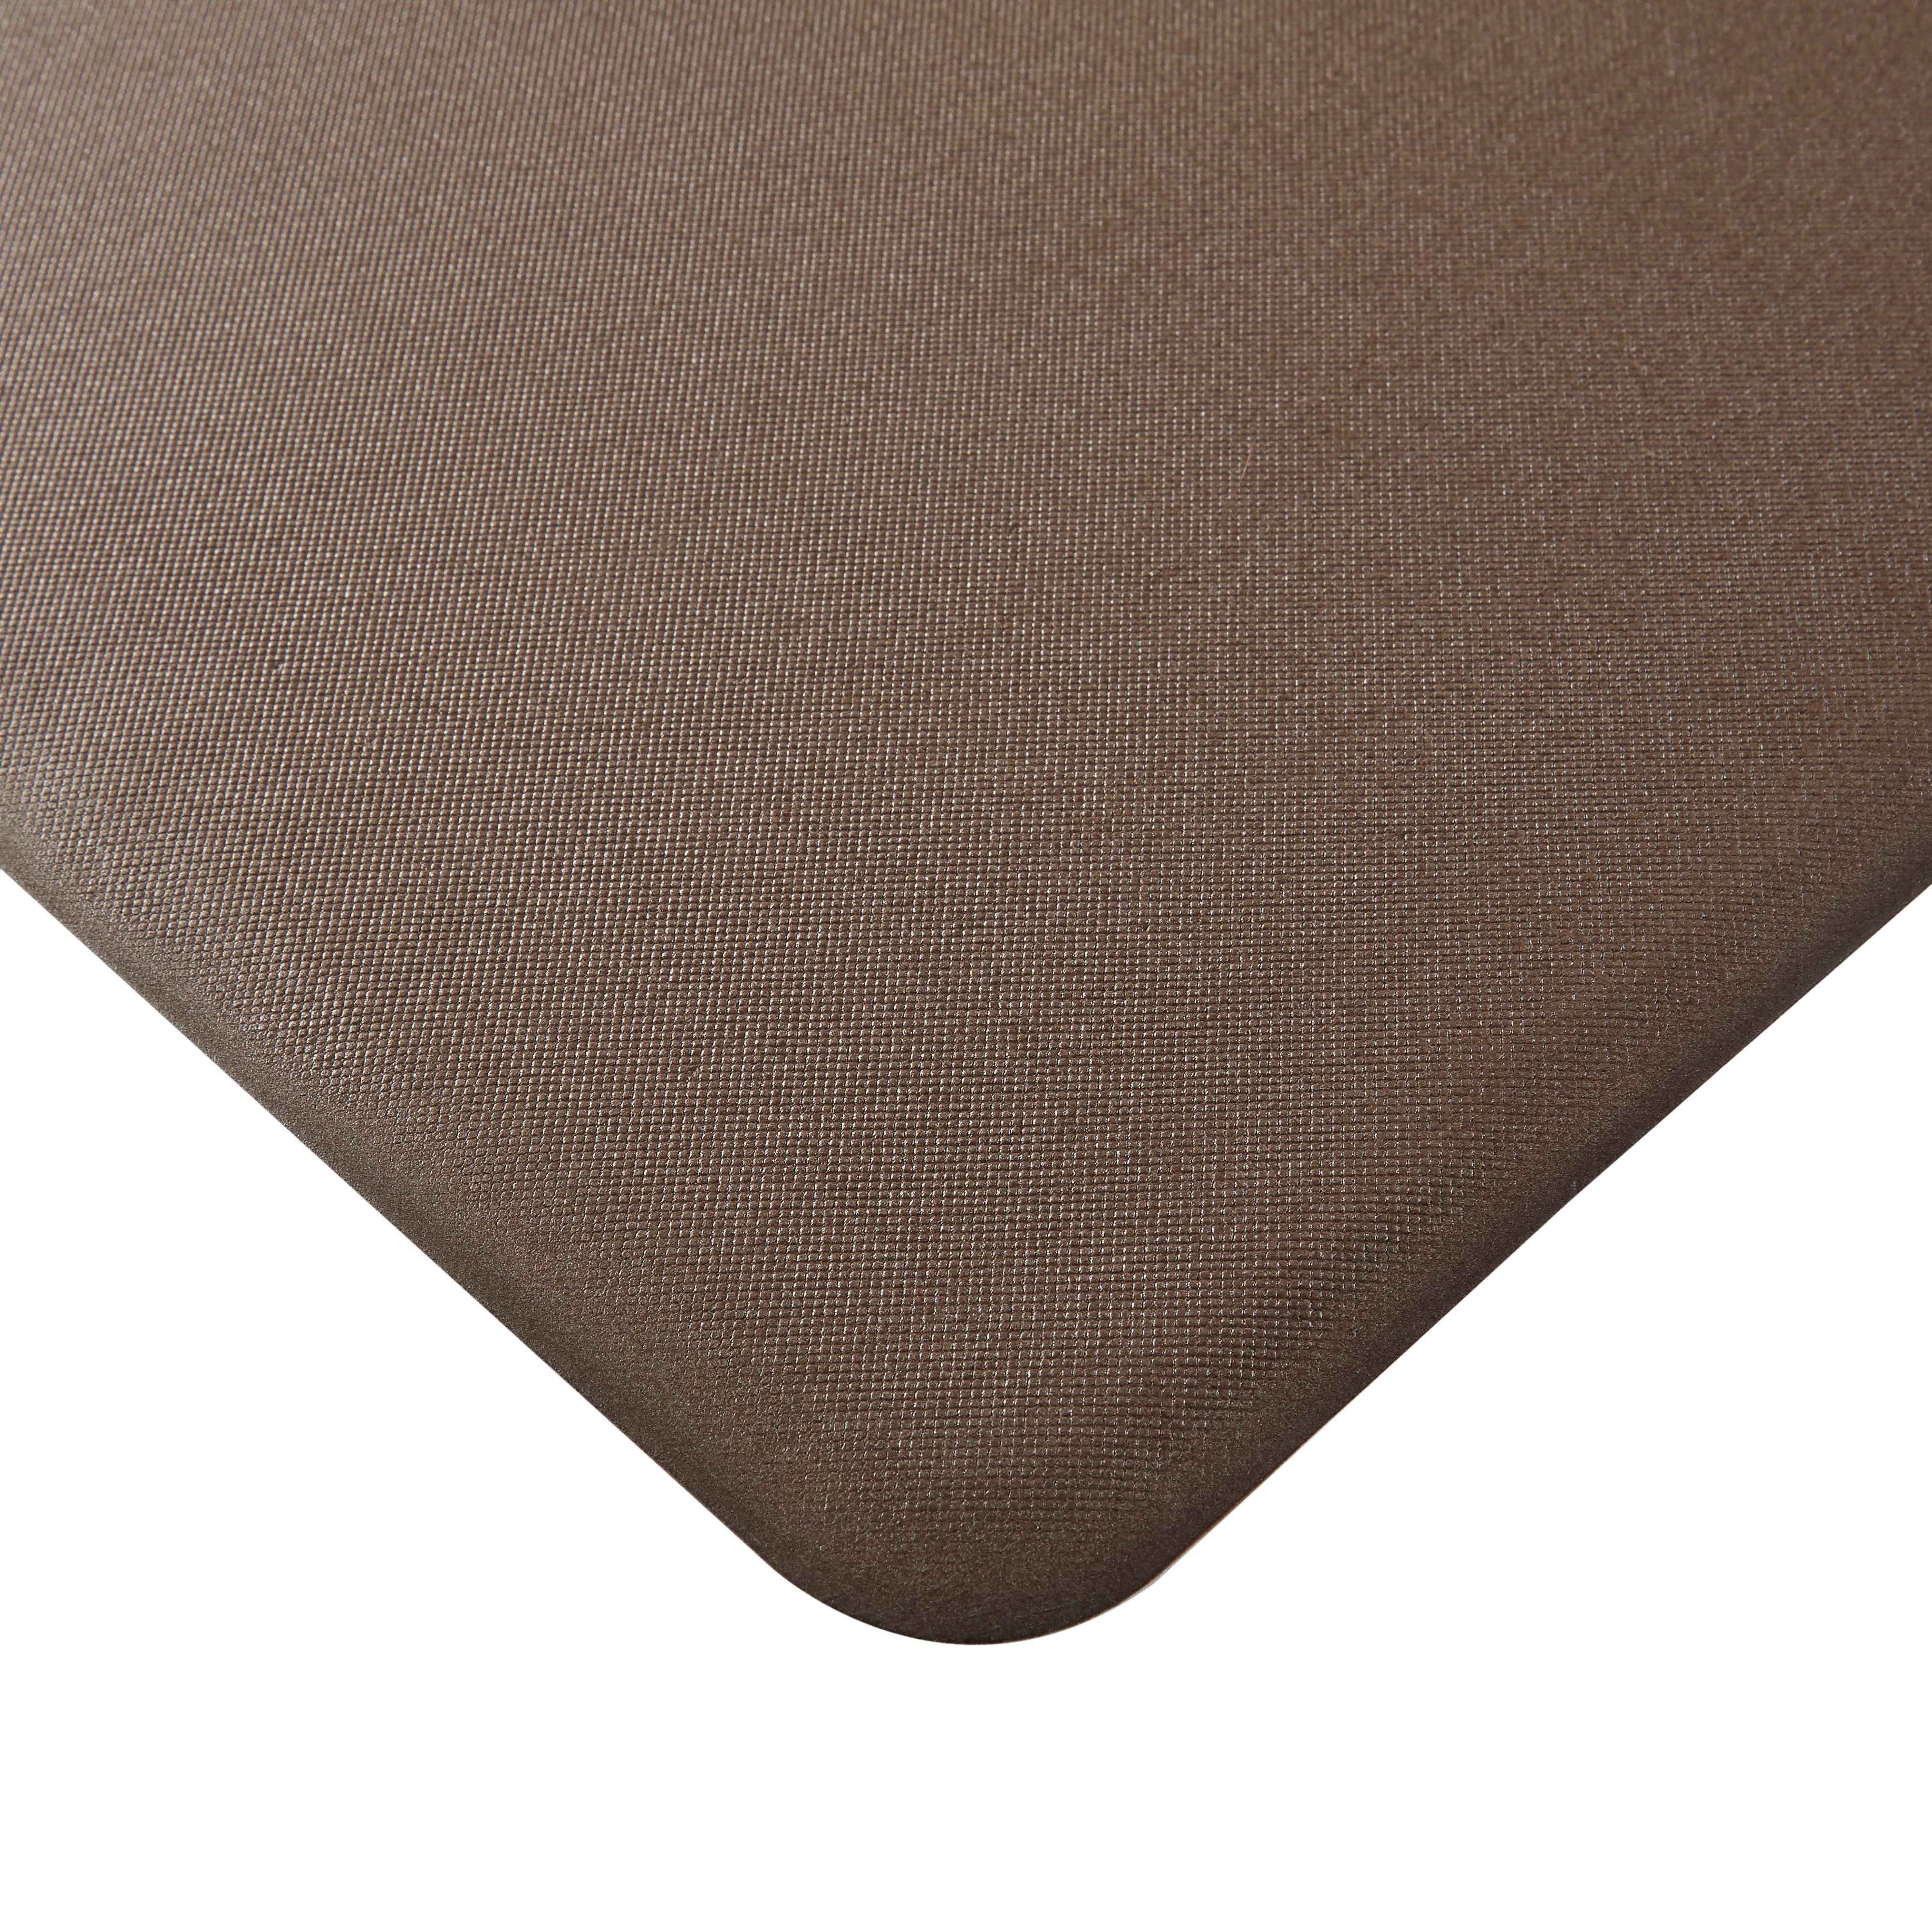 20" x 39" Oversized Cushioned Embossed Gentle Step Anti-Fatigue Kitchen Mat (Kitchen Utensil) - J&V Textiles